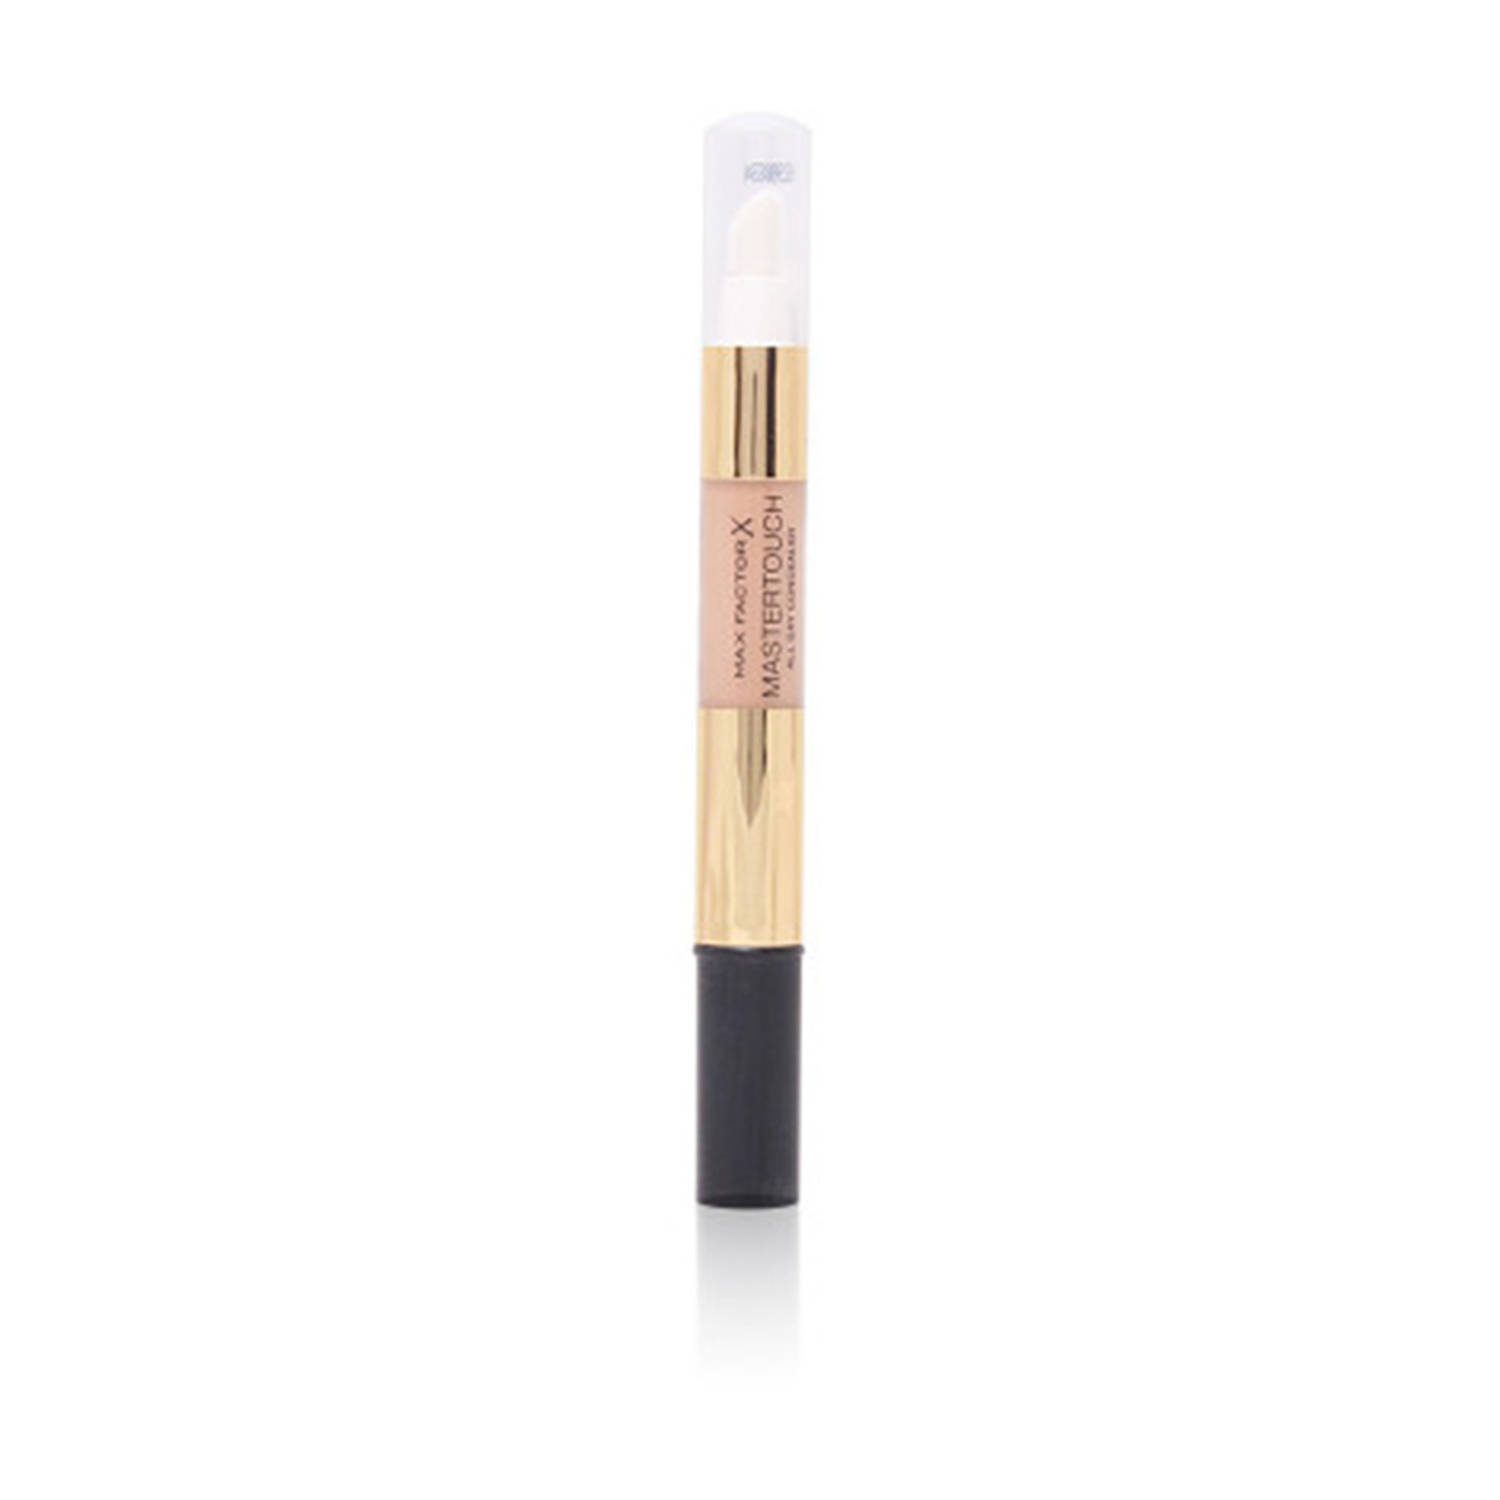 Max Factor Mastertouch All Day Concealer 307 Cashew